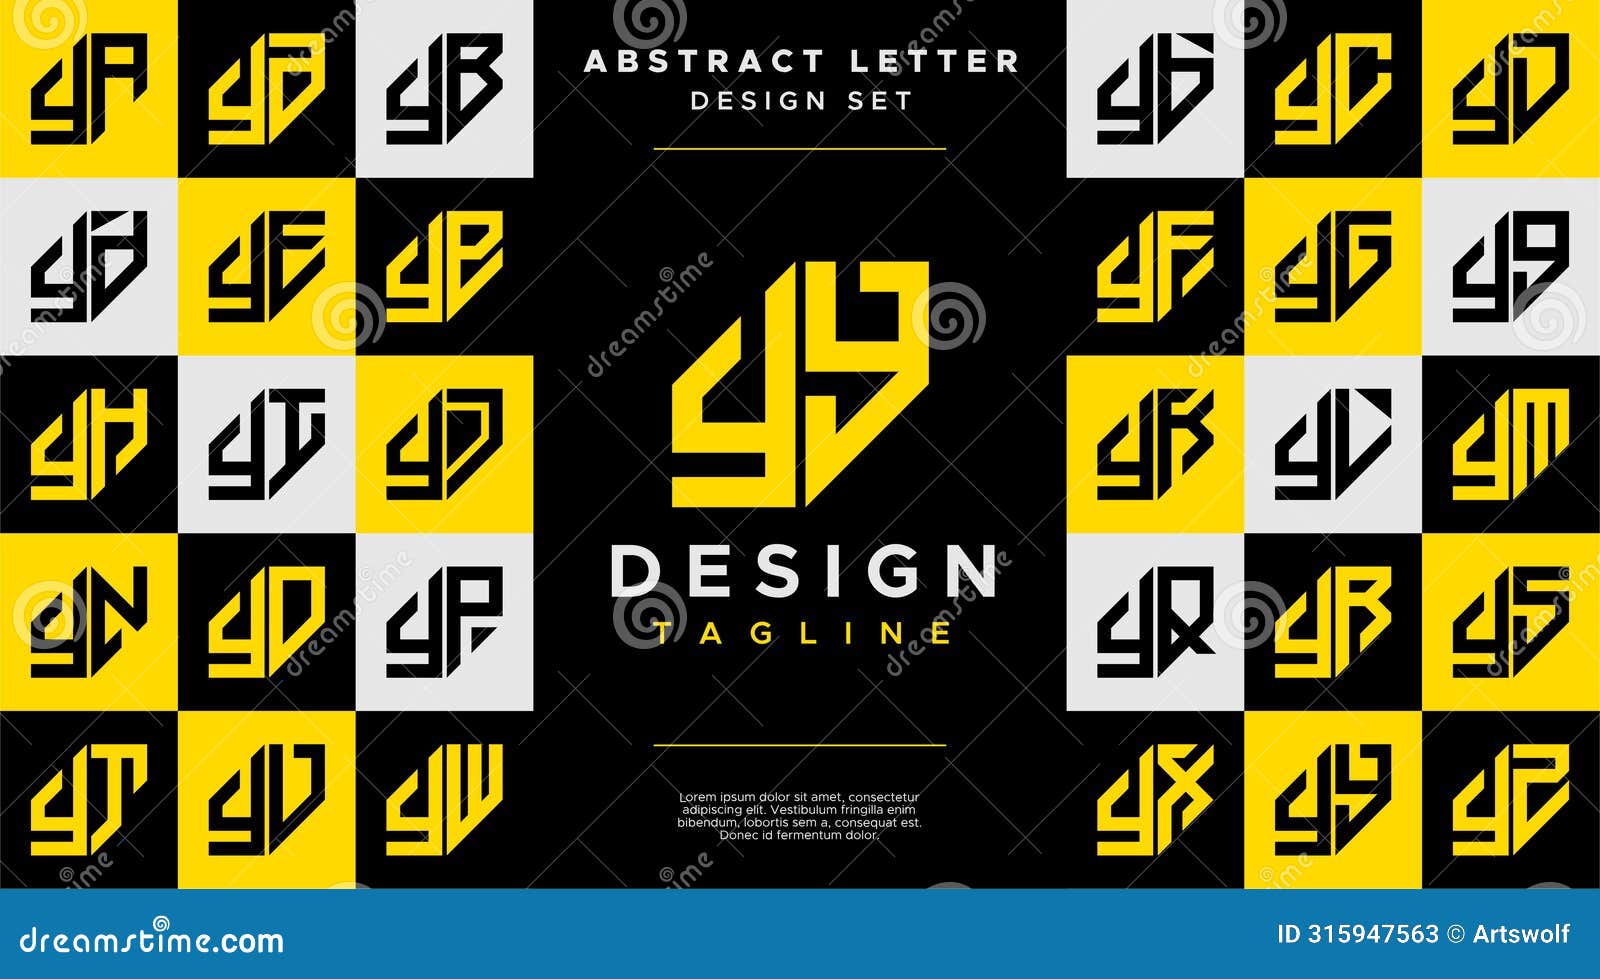 simple business abstract letter y yy logo  set